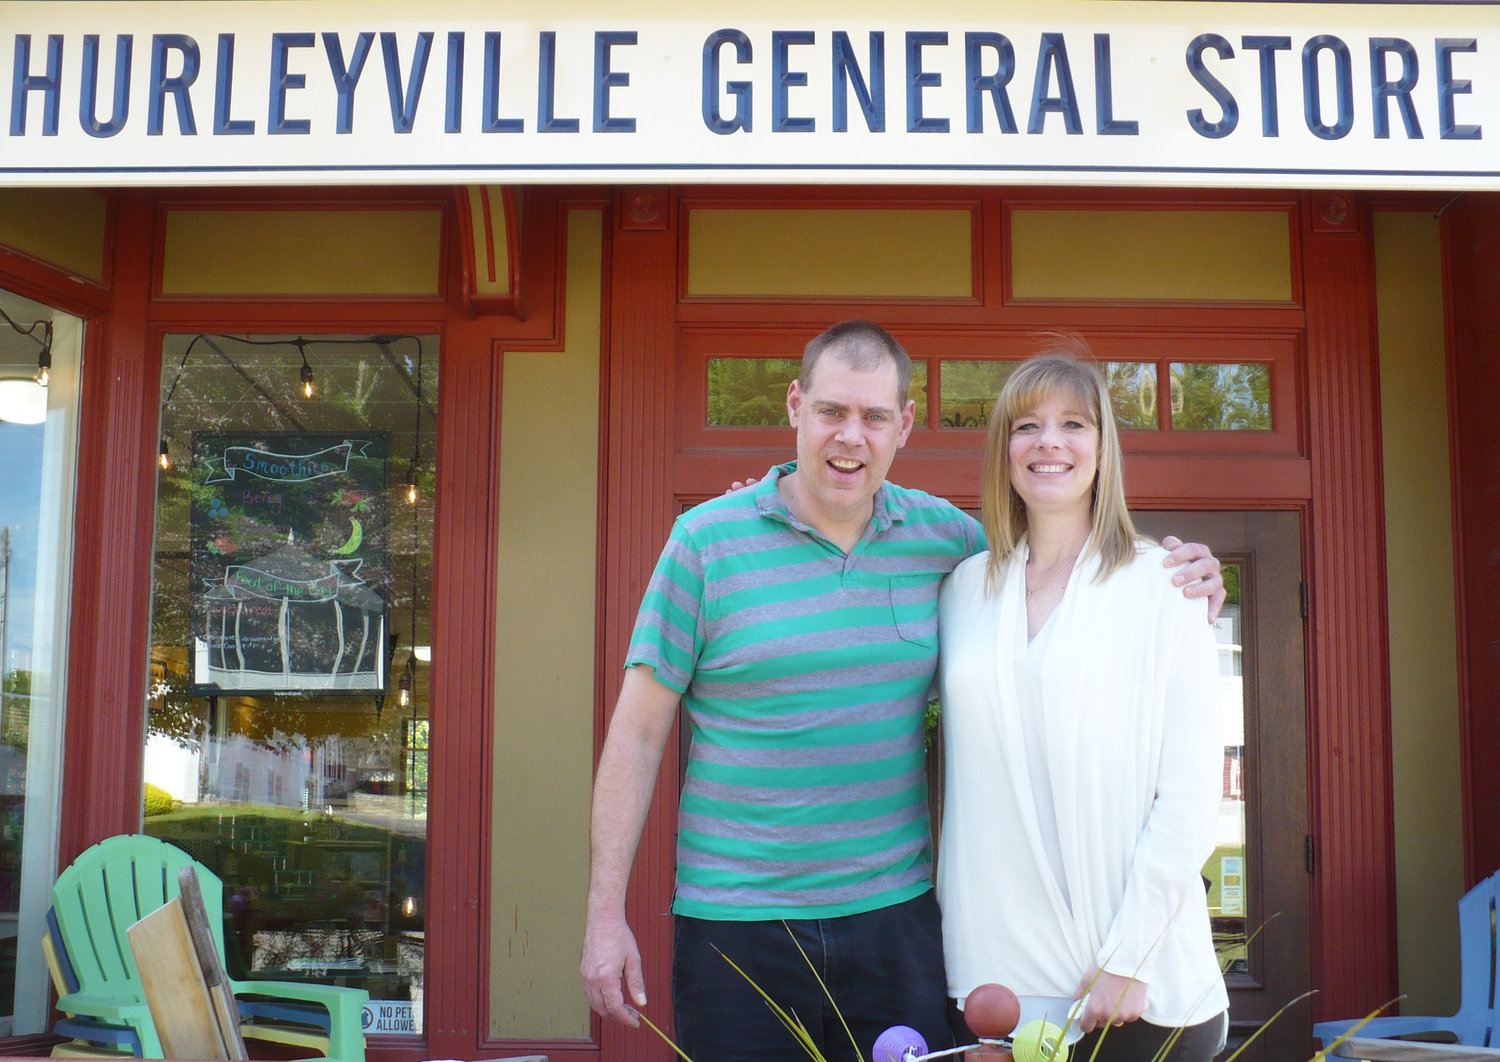 Hurleyville General Store owner Denise Lombardi and her brother Jack Van Dormolen celebrate the welcoming spirit of the hamlet. Van Dormolen, who is hearing impaired, signed: 'People here are so friendly, happy to see me. It's beautiful here and peaceful.'